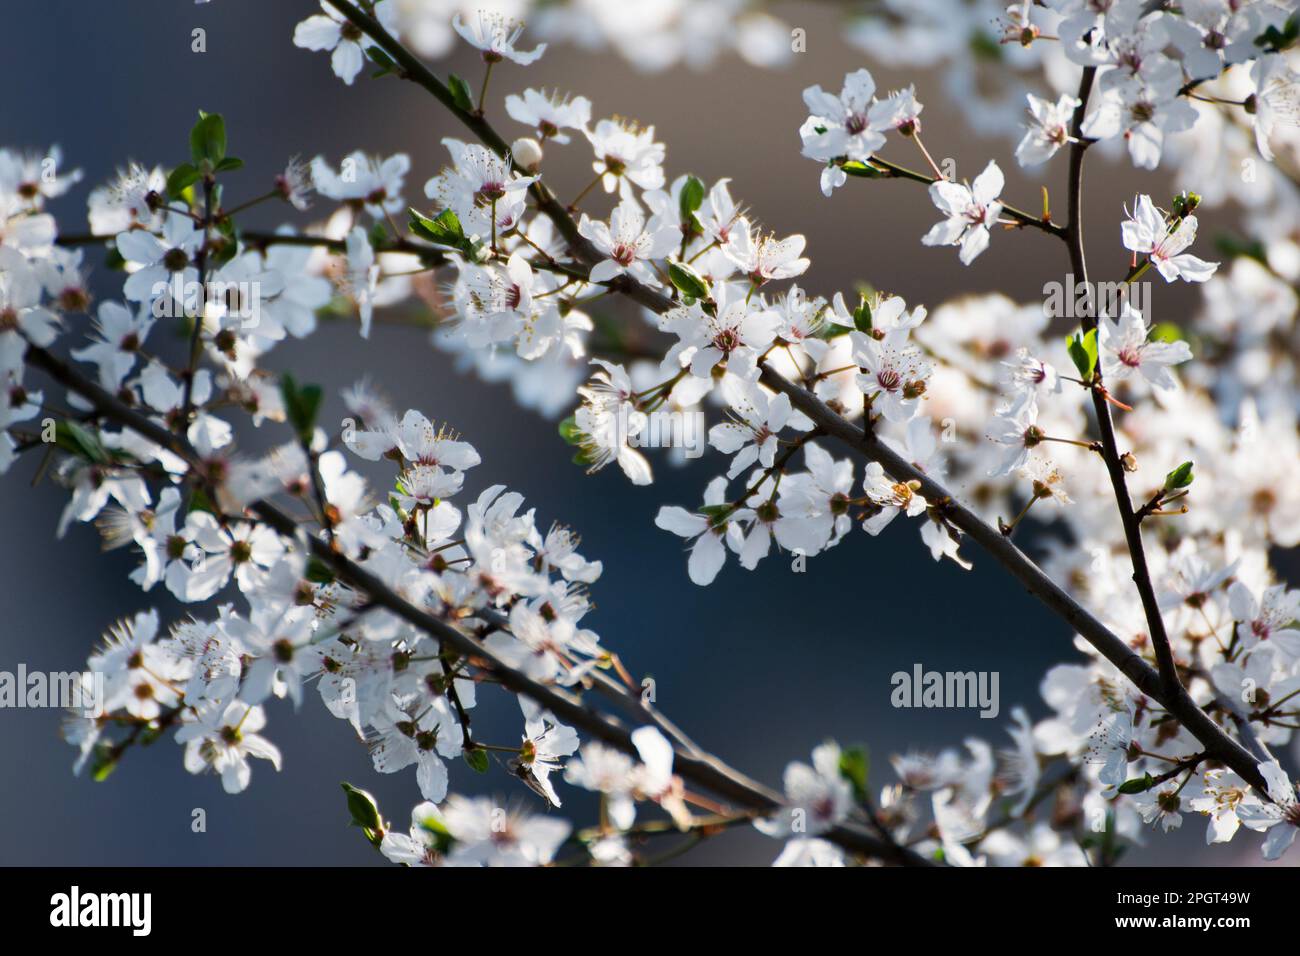 Prunus cerasifera blossom, cherry plum, myrobalan plum is one of the first trees to flower in spring. The flowers are white or pale pink. Stock Photo